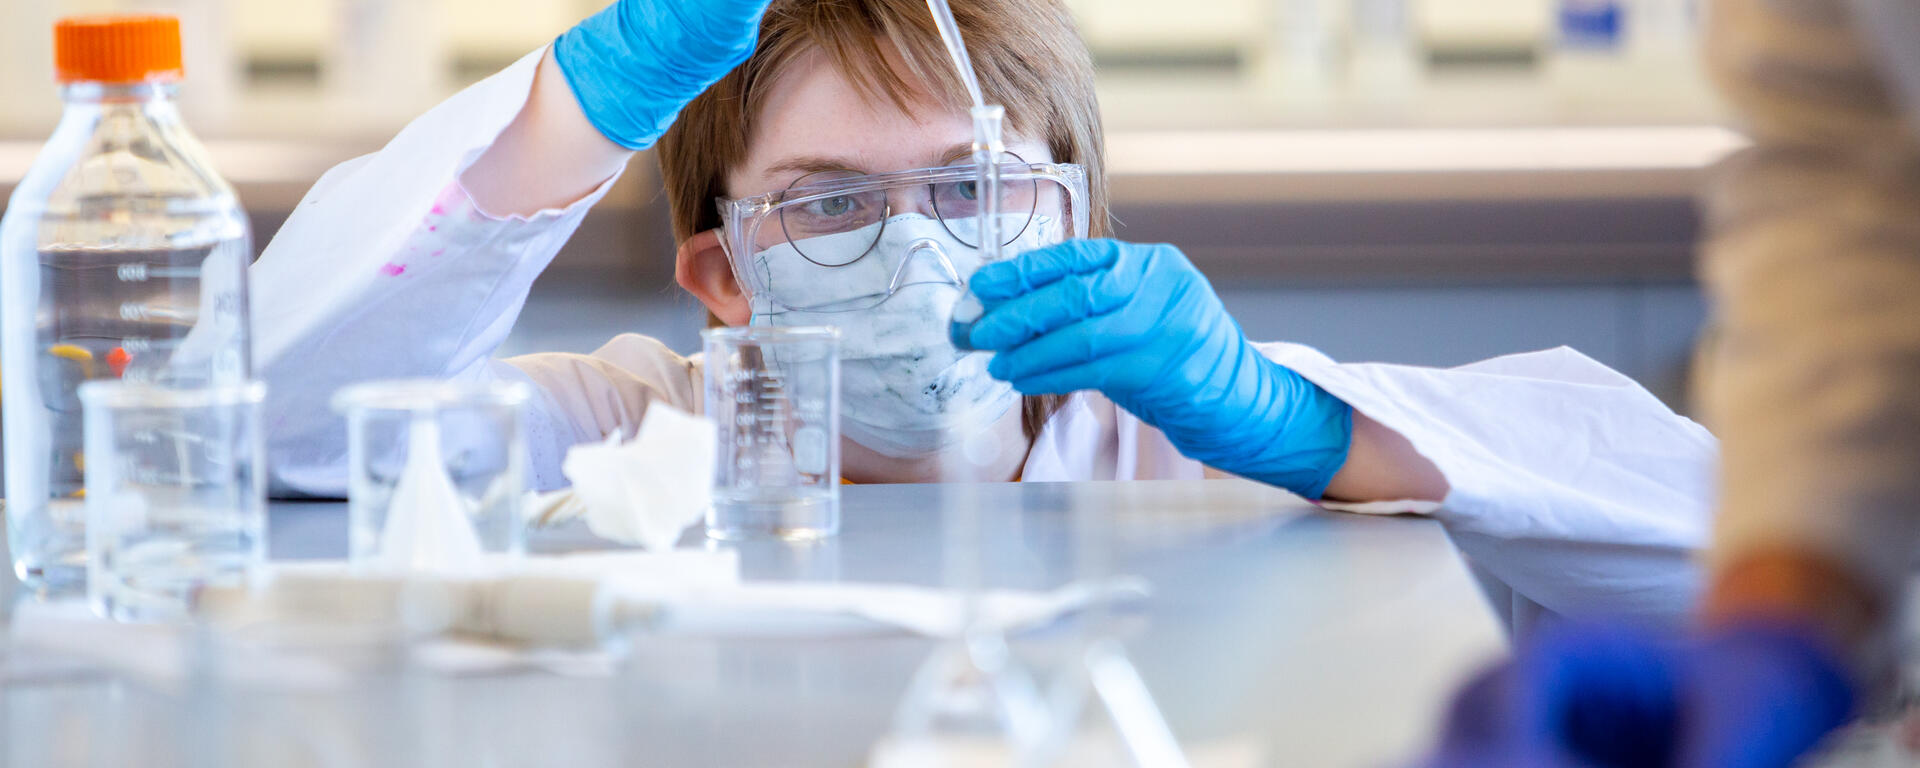 A student in a lab wearing safety glasses, mask and gloves uses a syringe to drop liquid into another vessel.